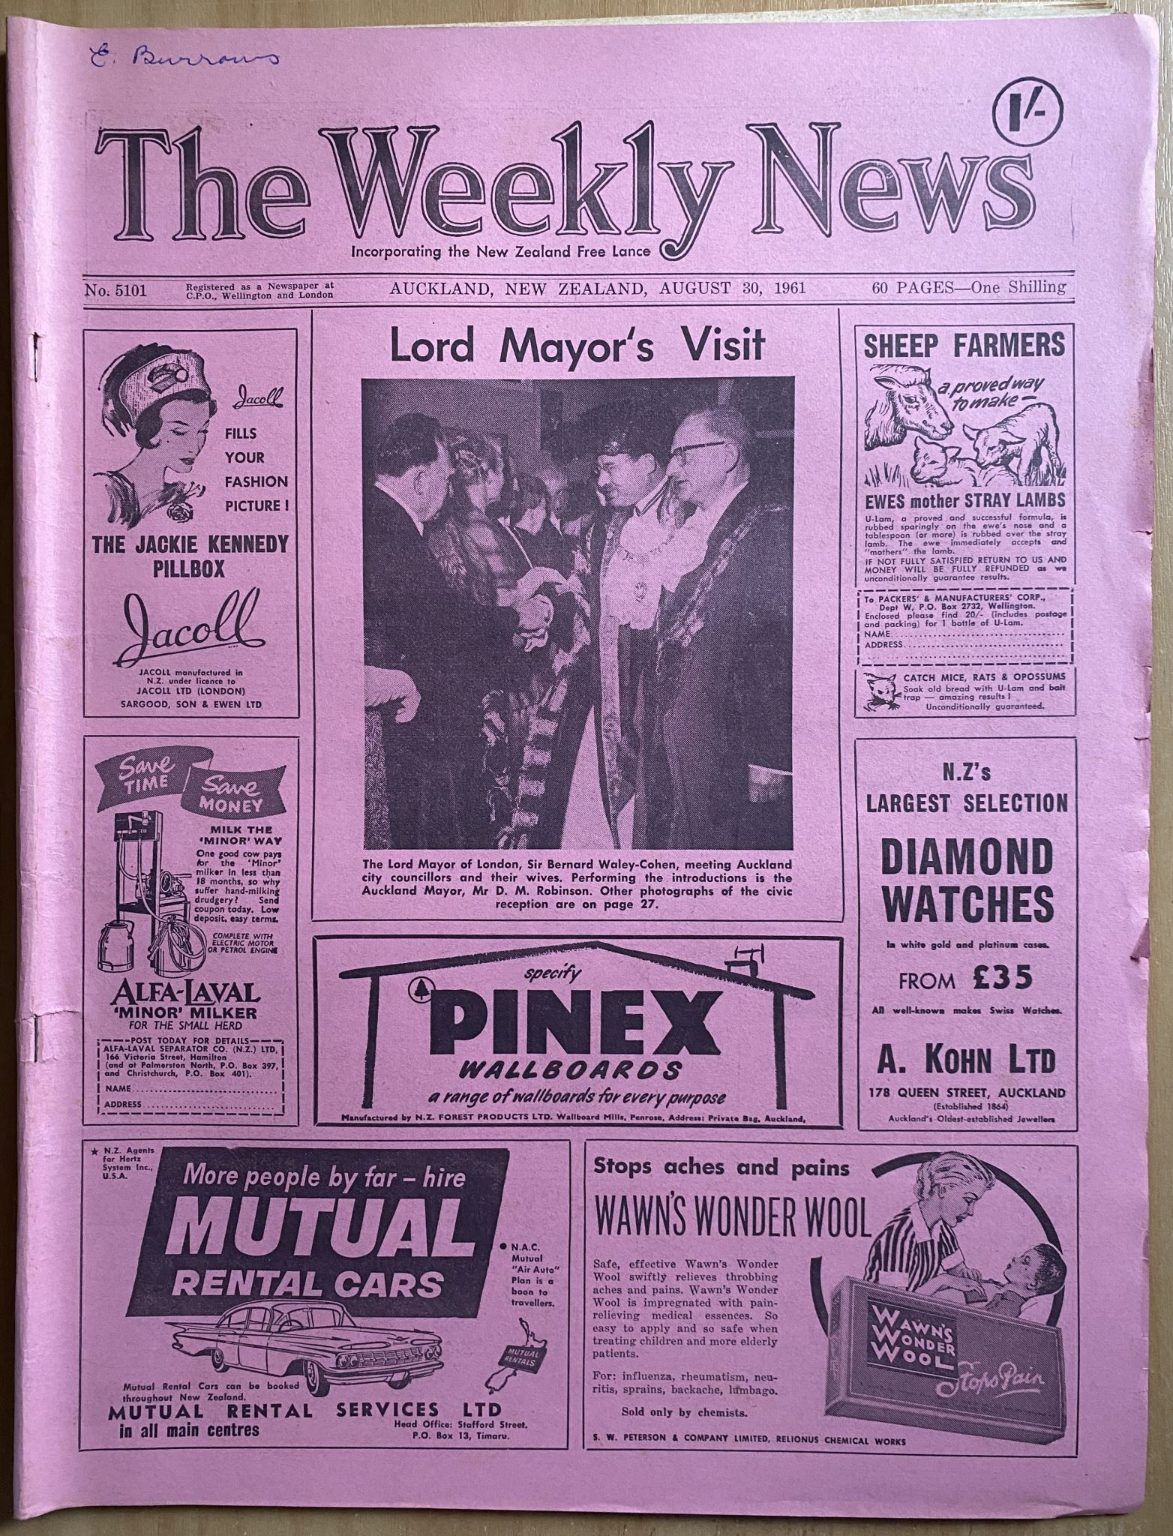 OLD NEWSPAPER: The Weekly News, No. 5101, 30 August 1961